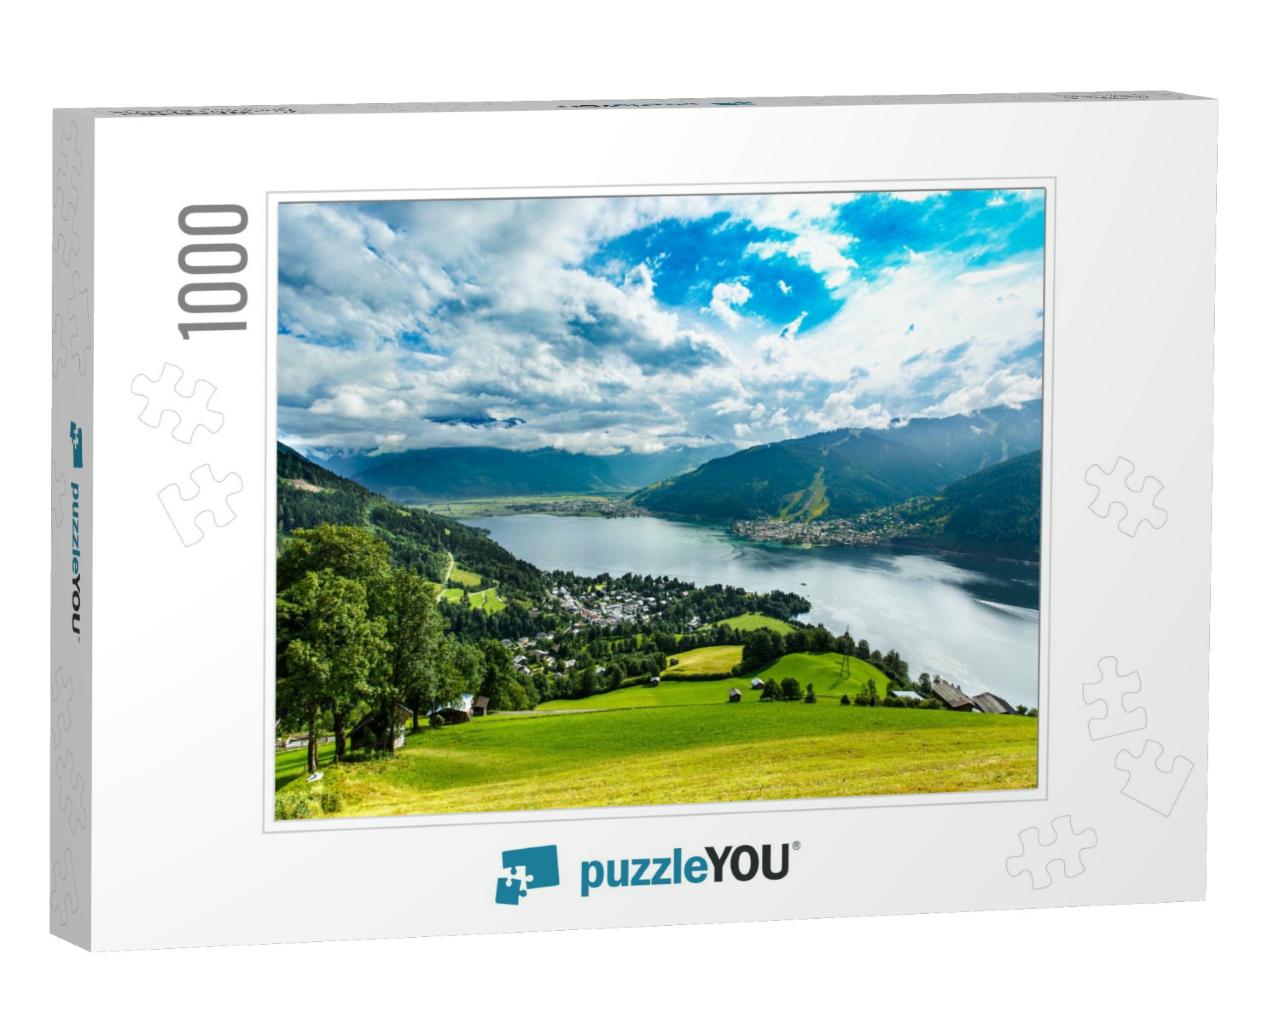 View Over Zeller See Lake. Zell Am See, Austria, Europe... Jigsaw Puzzle with 1000 pieces